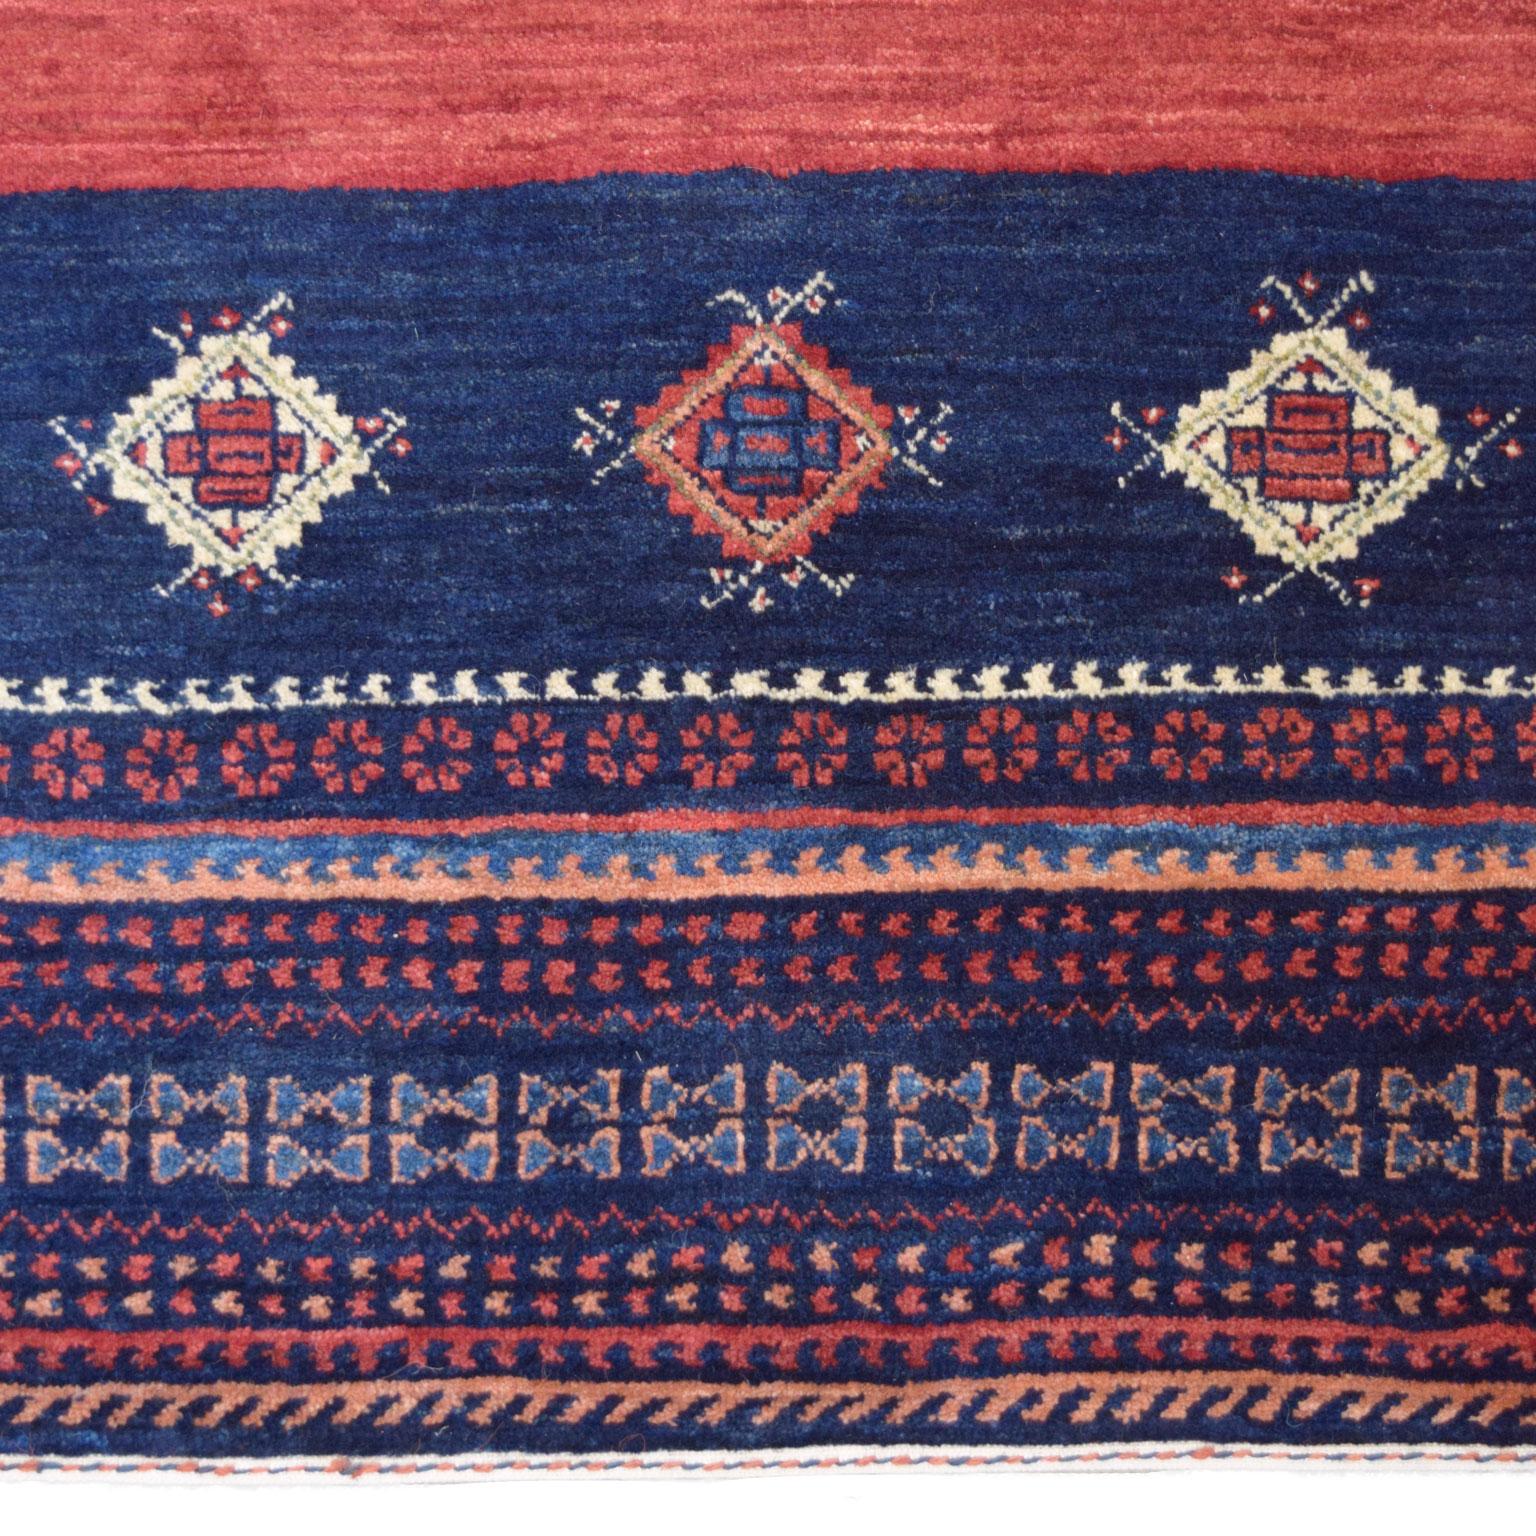 Hand-Knotted Wool Persian Qashqai Tribal Rug, Red, Green, Indigo, Cream, 4’ x 6’ In New Condition For Sale In New York, NY